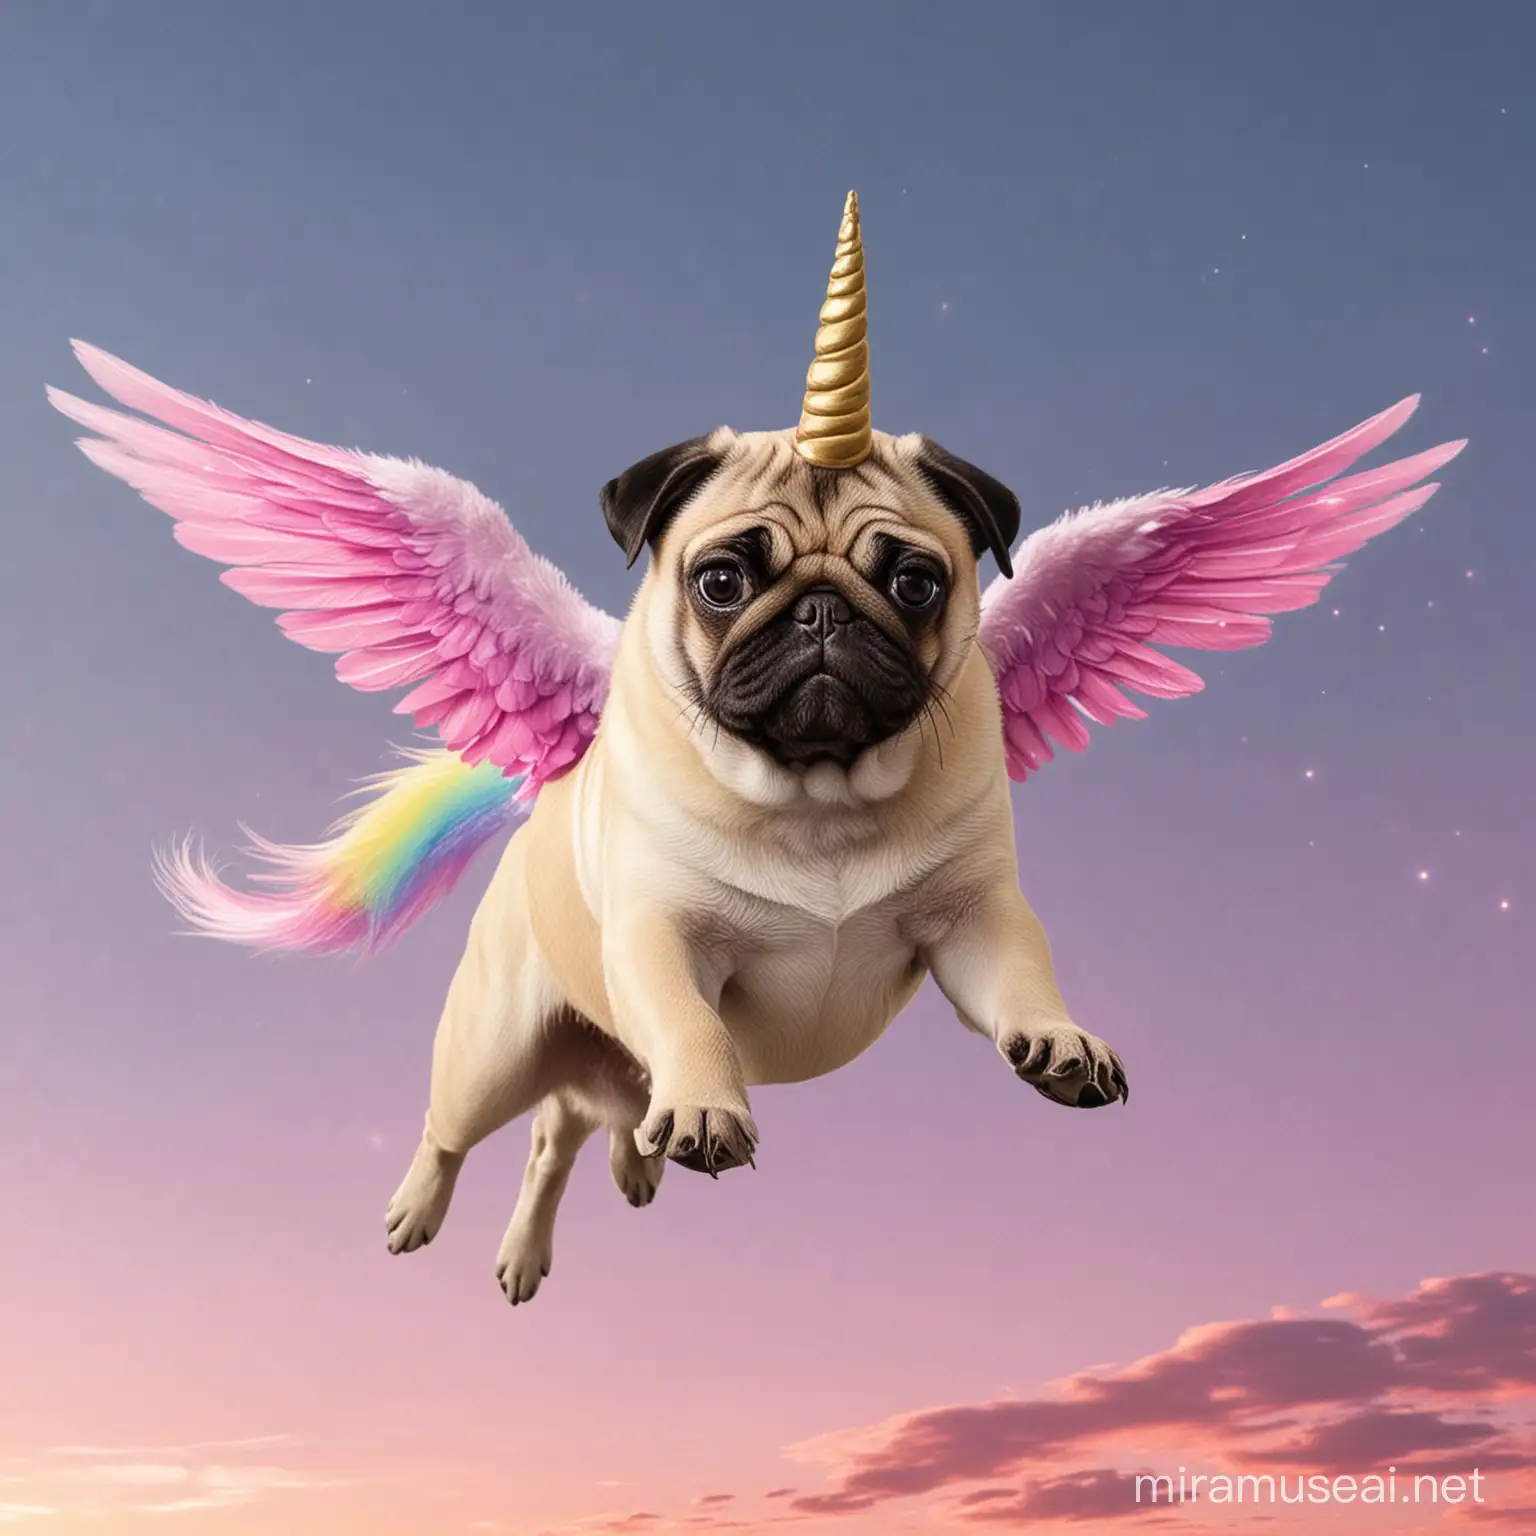 Pug mixed with a unicorn  flying